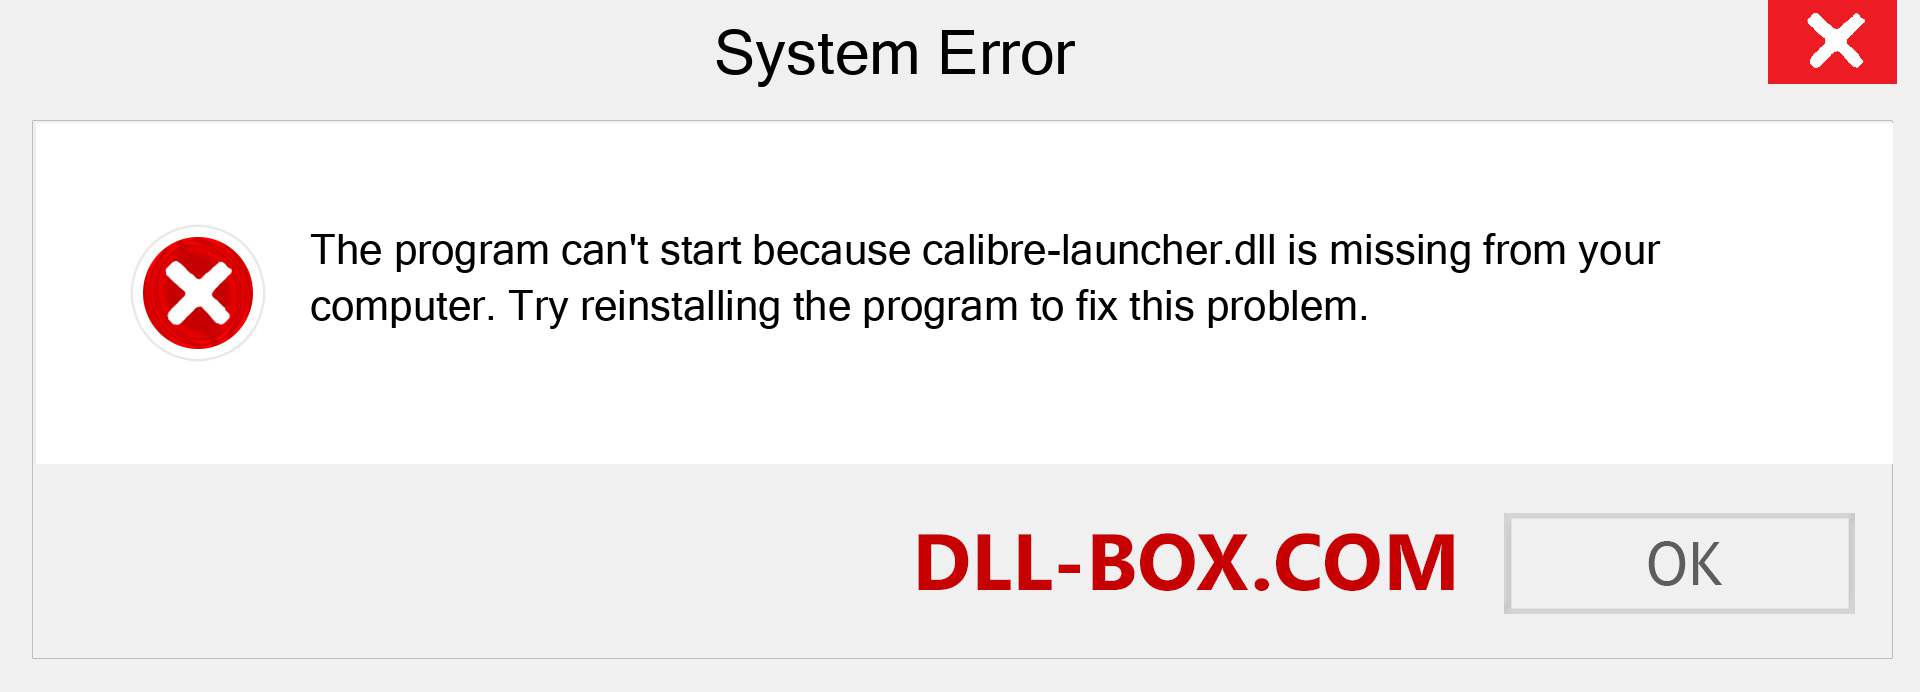  calibre-launcher.dll file is missing?. Download for Windows 7, 8, 10 - Fix  calibre-launcher dll Missing Error on Windows, photos, images